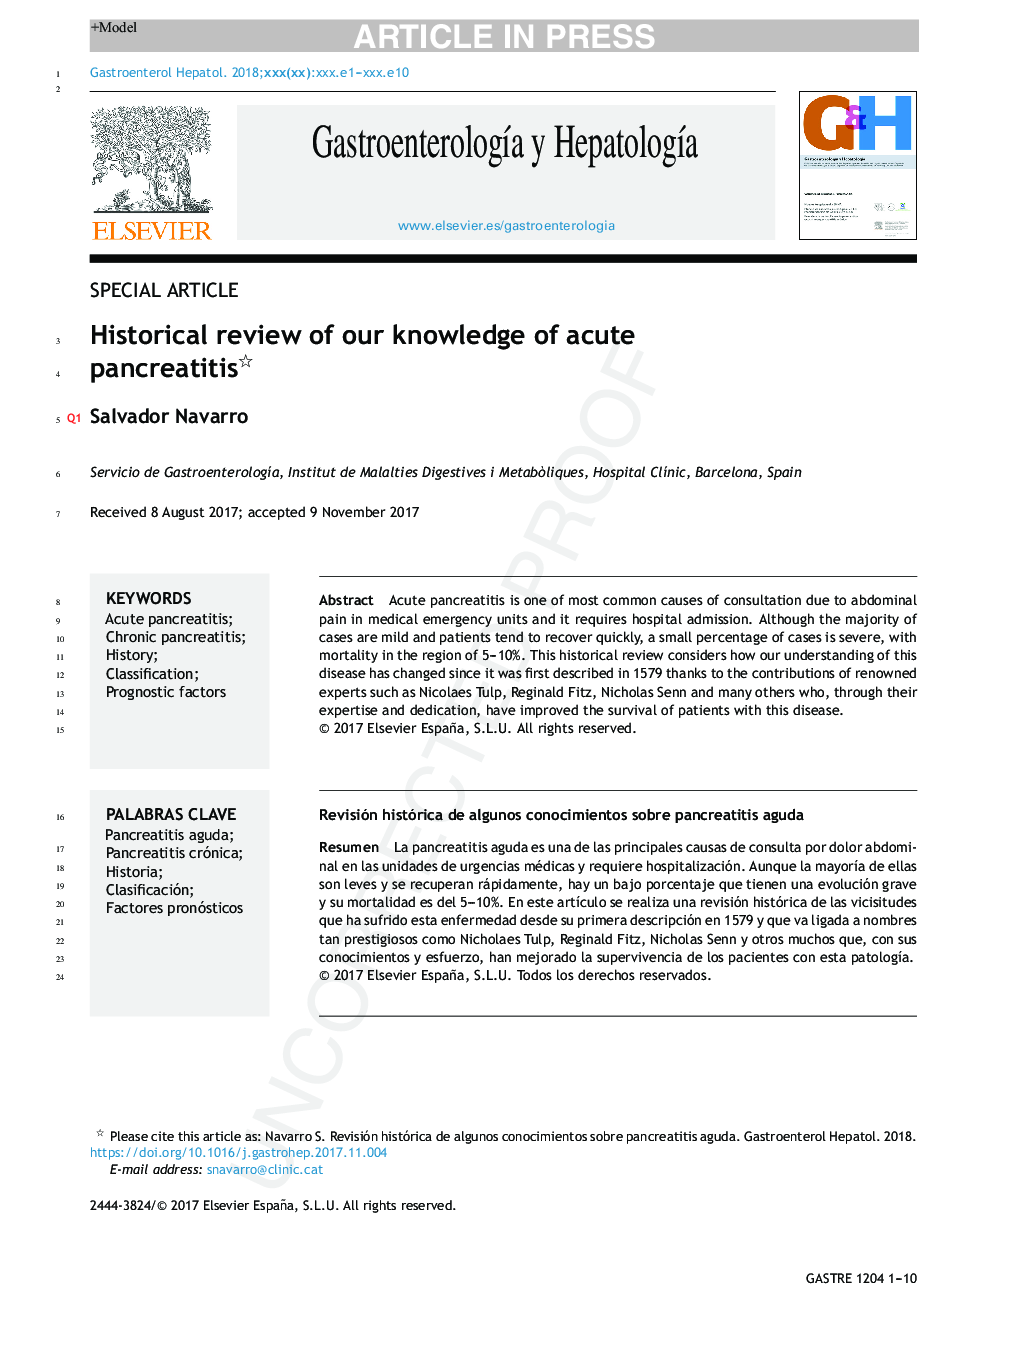 Historical review of our knowledge of acute pancreatitis